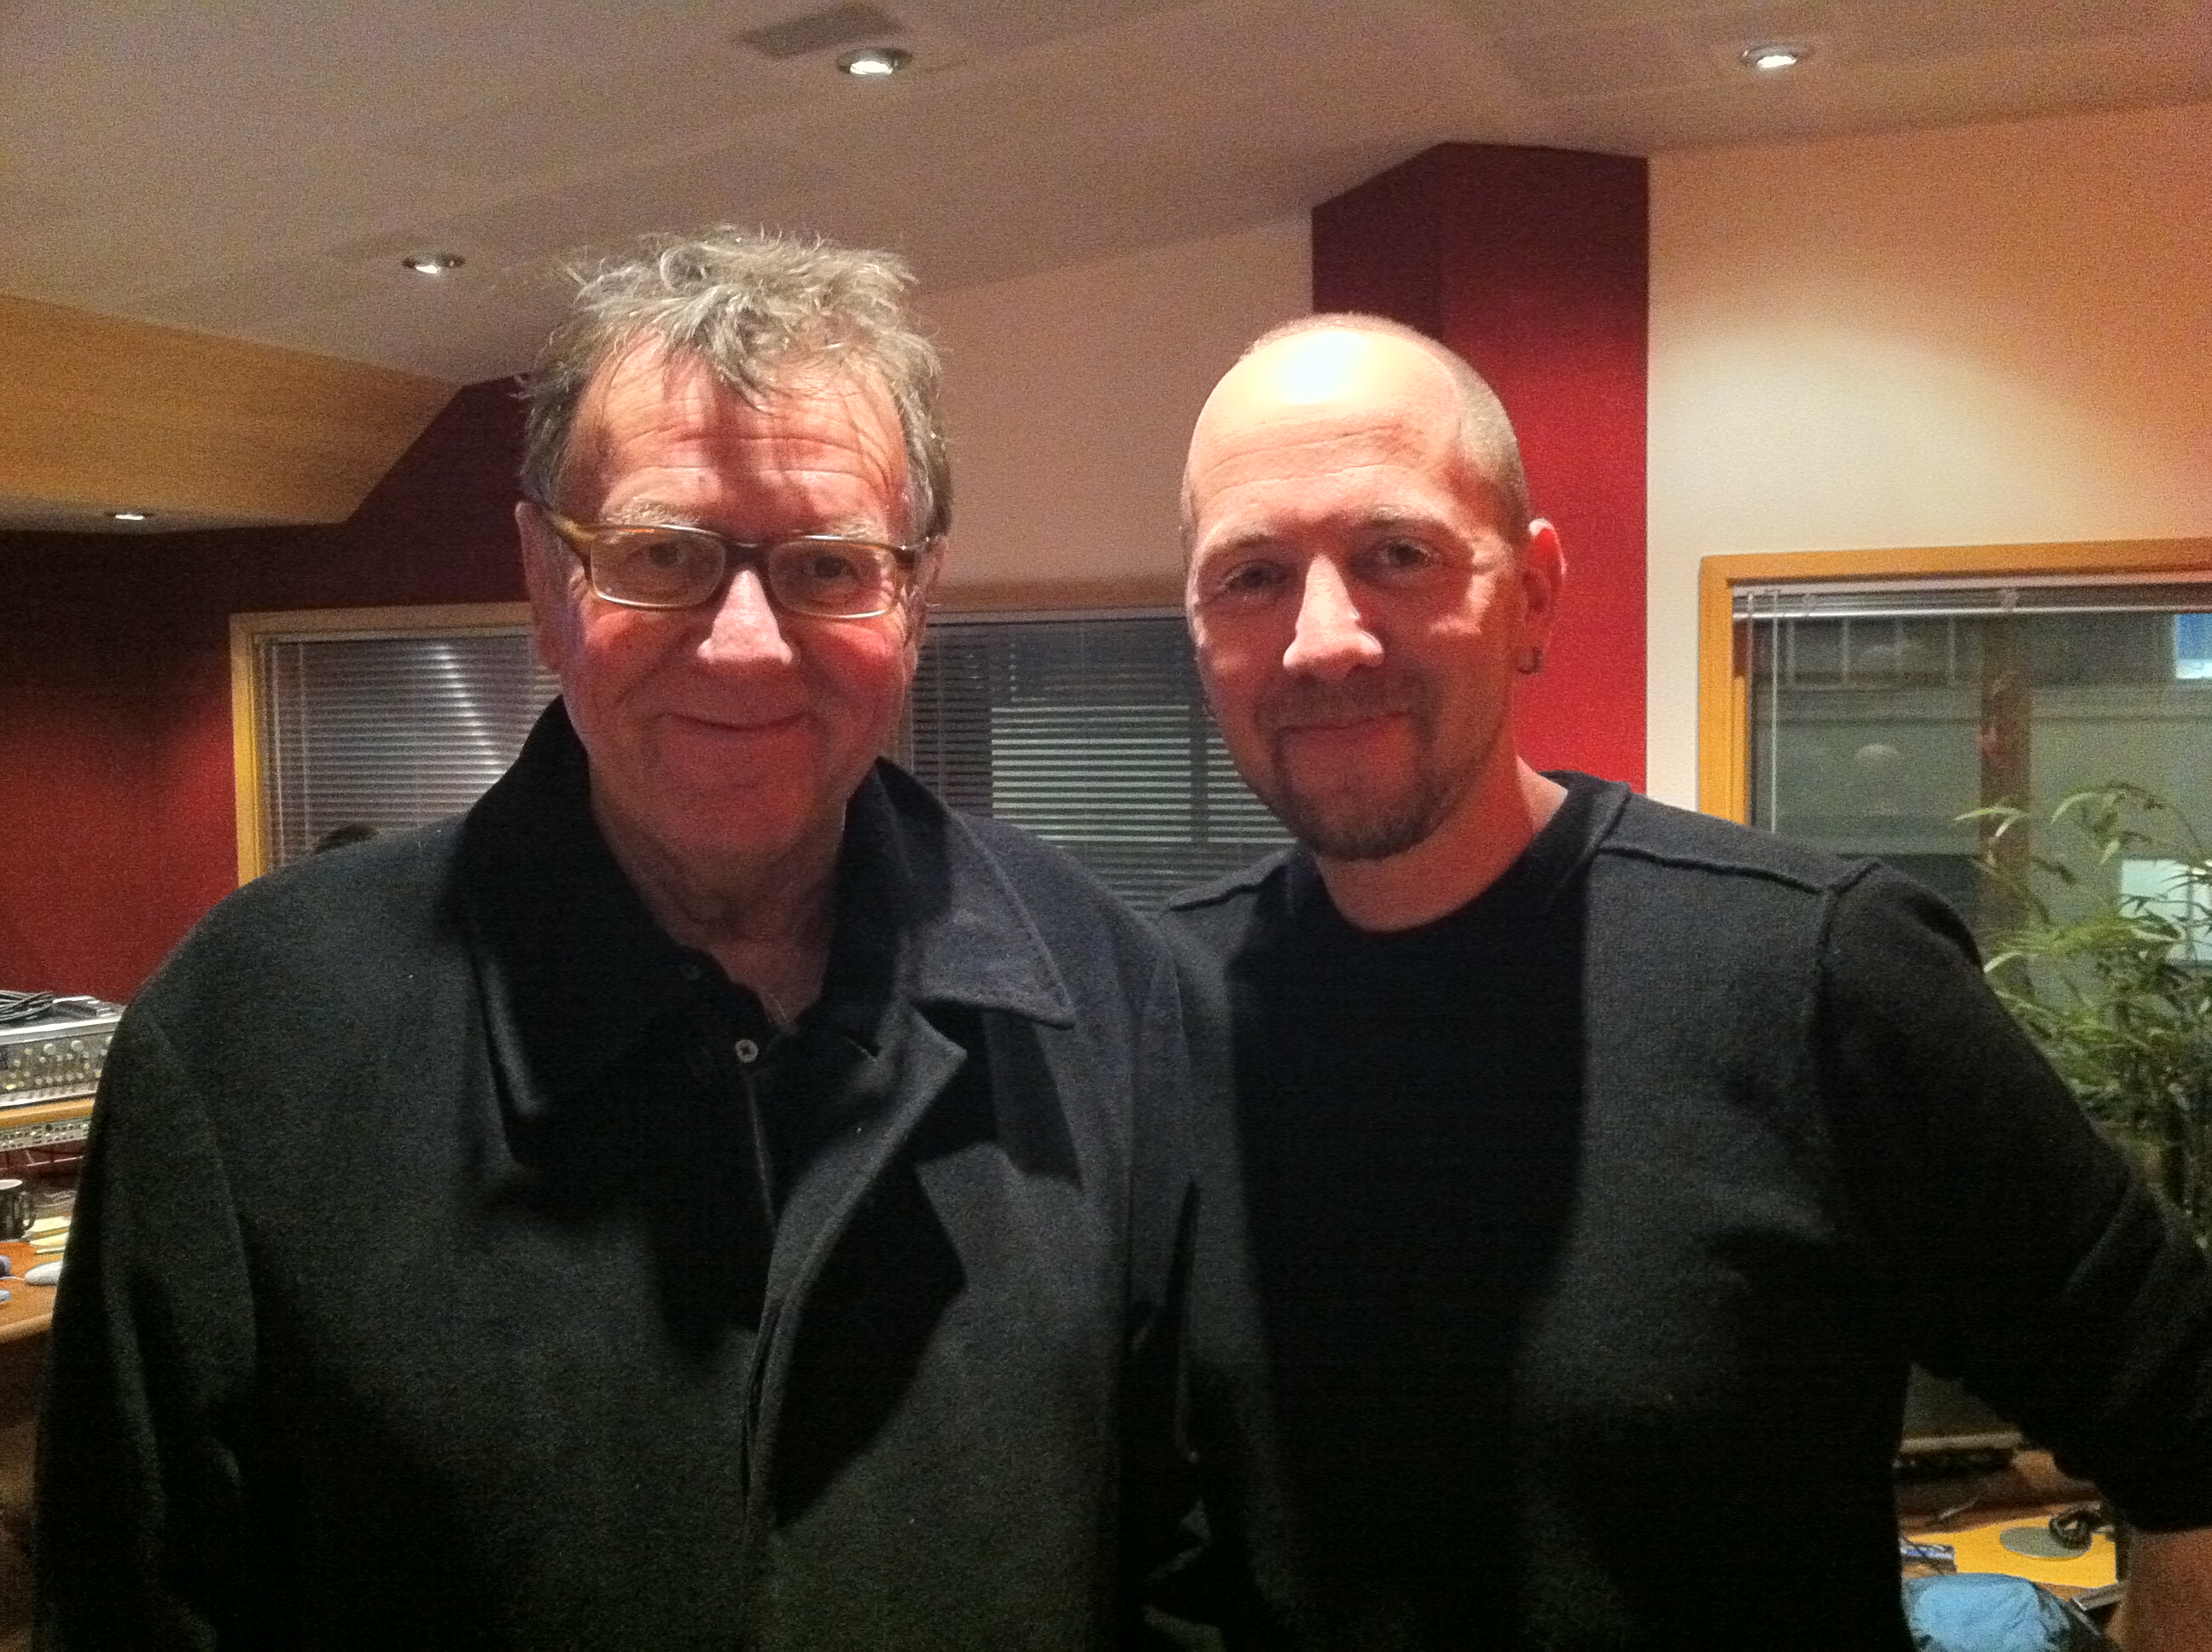 Tom Wilkinson and Director Keith Arem recording in London.